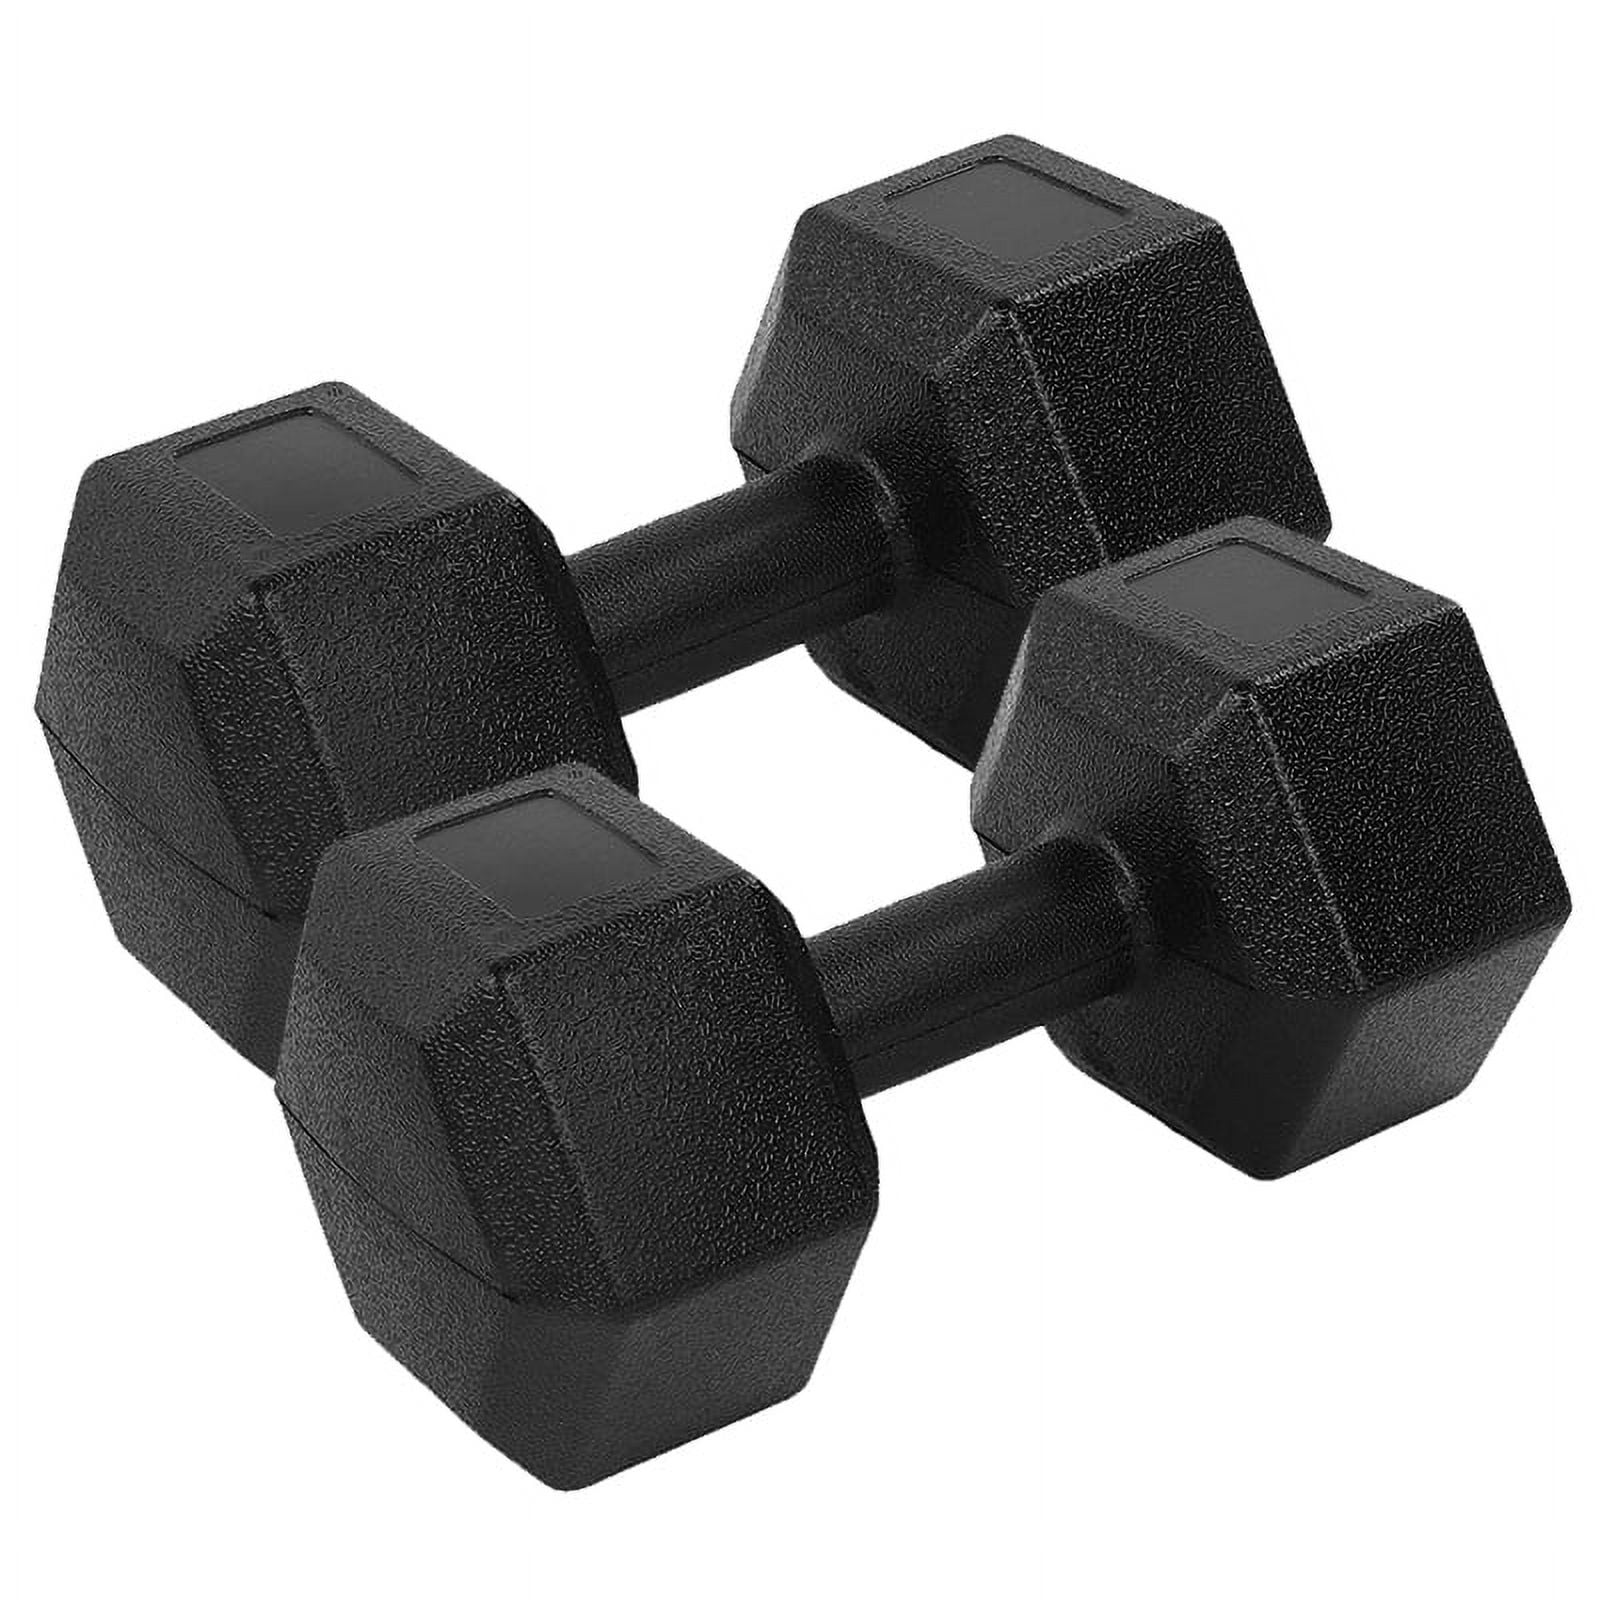 Kg/Lb Iron Grip Rubber / PU Fixed Barbells - China Barbell and